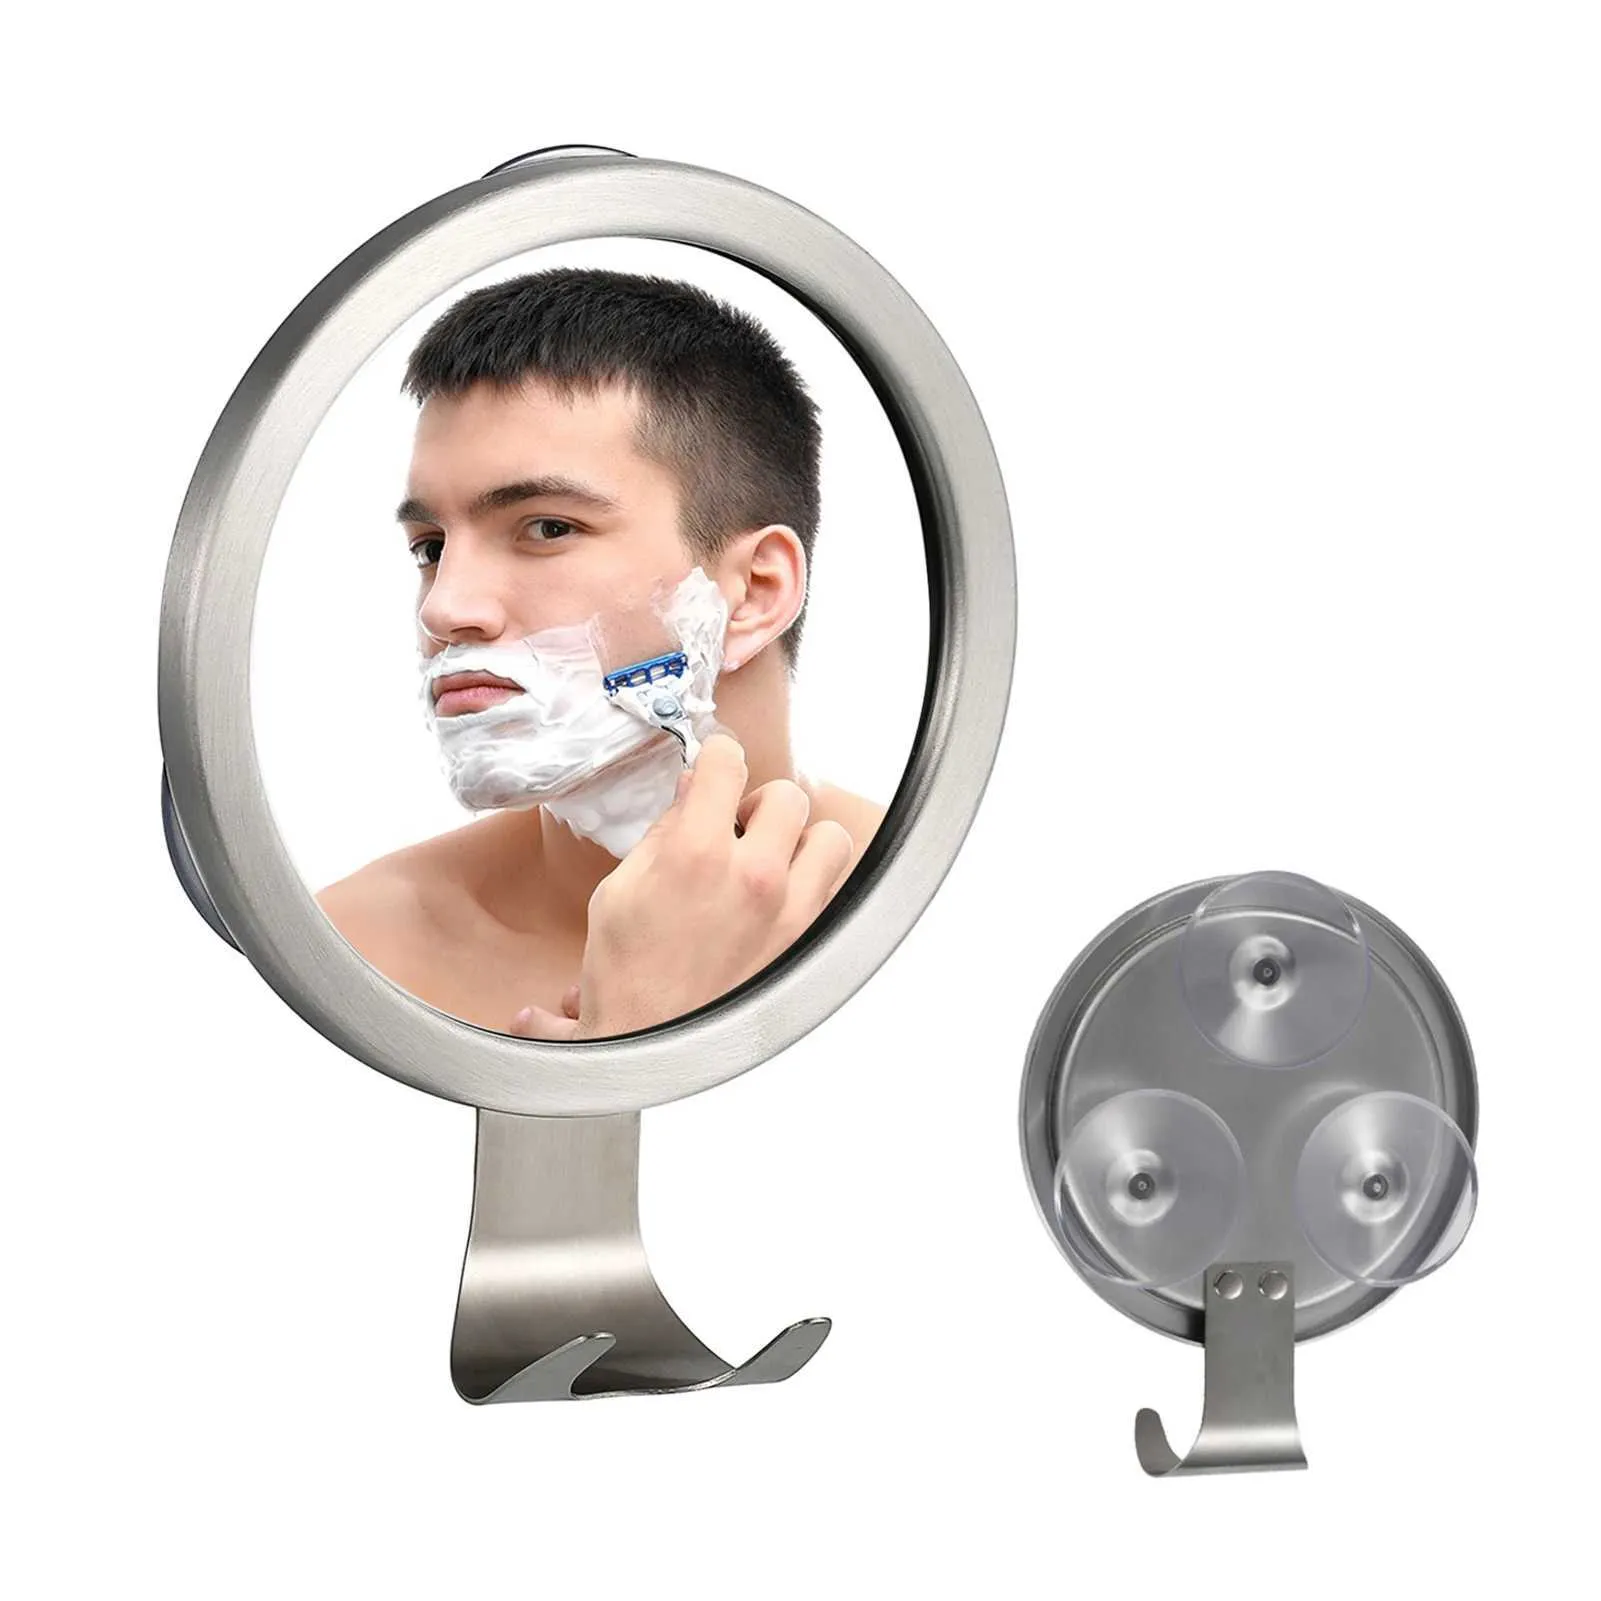 Compact Mirrors Bathroom fog free mirror shower shaver hook wall installation with suction cup Q240509